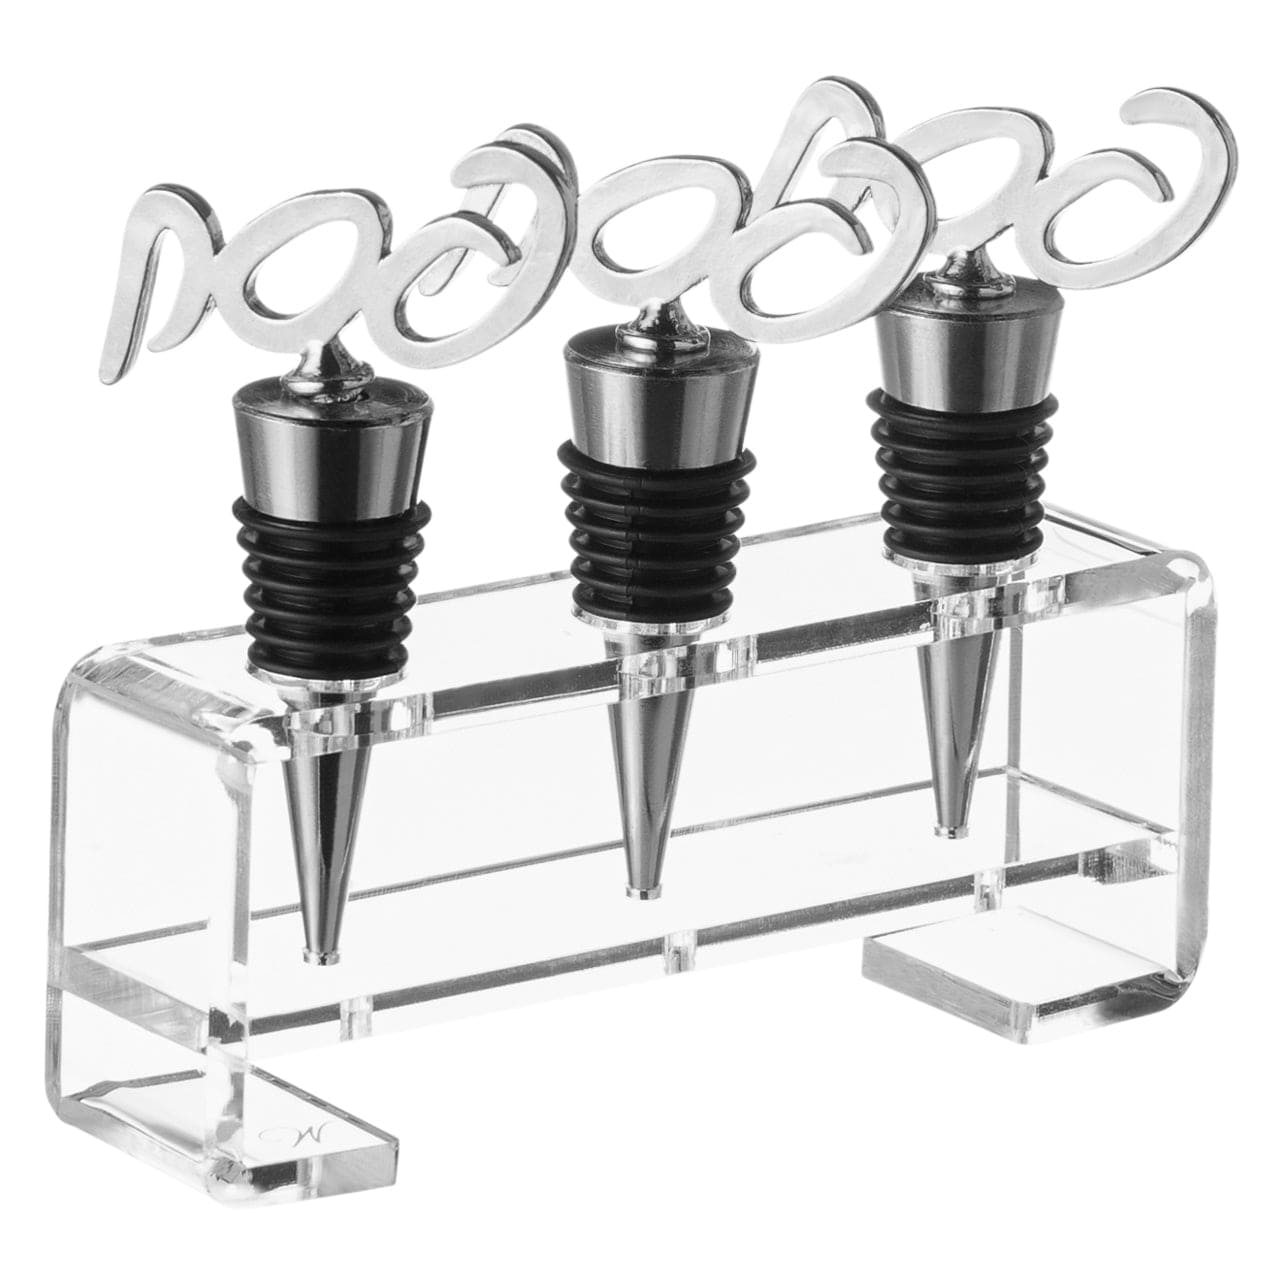 Pesach Wine Stopper Set - Waterdale Collection